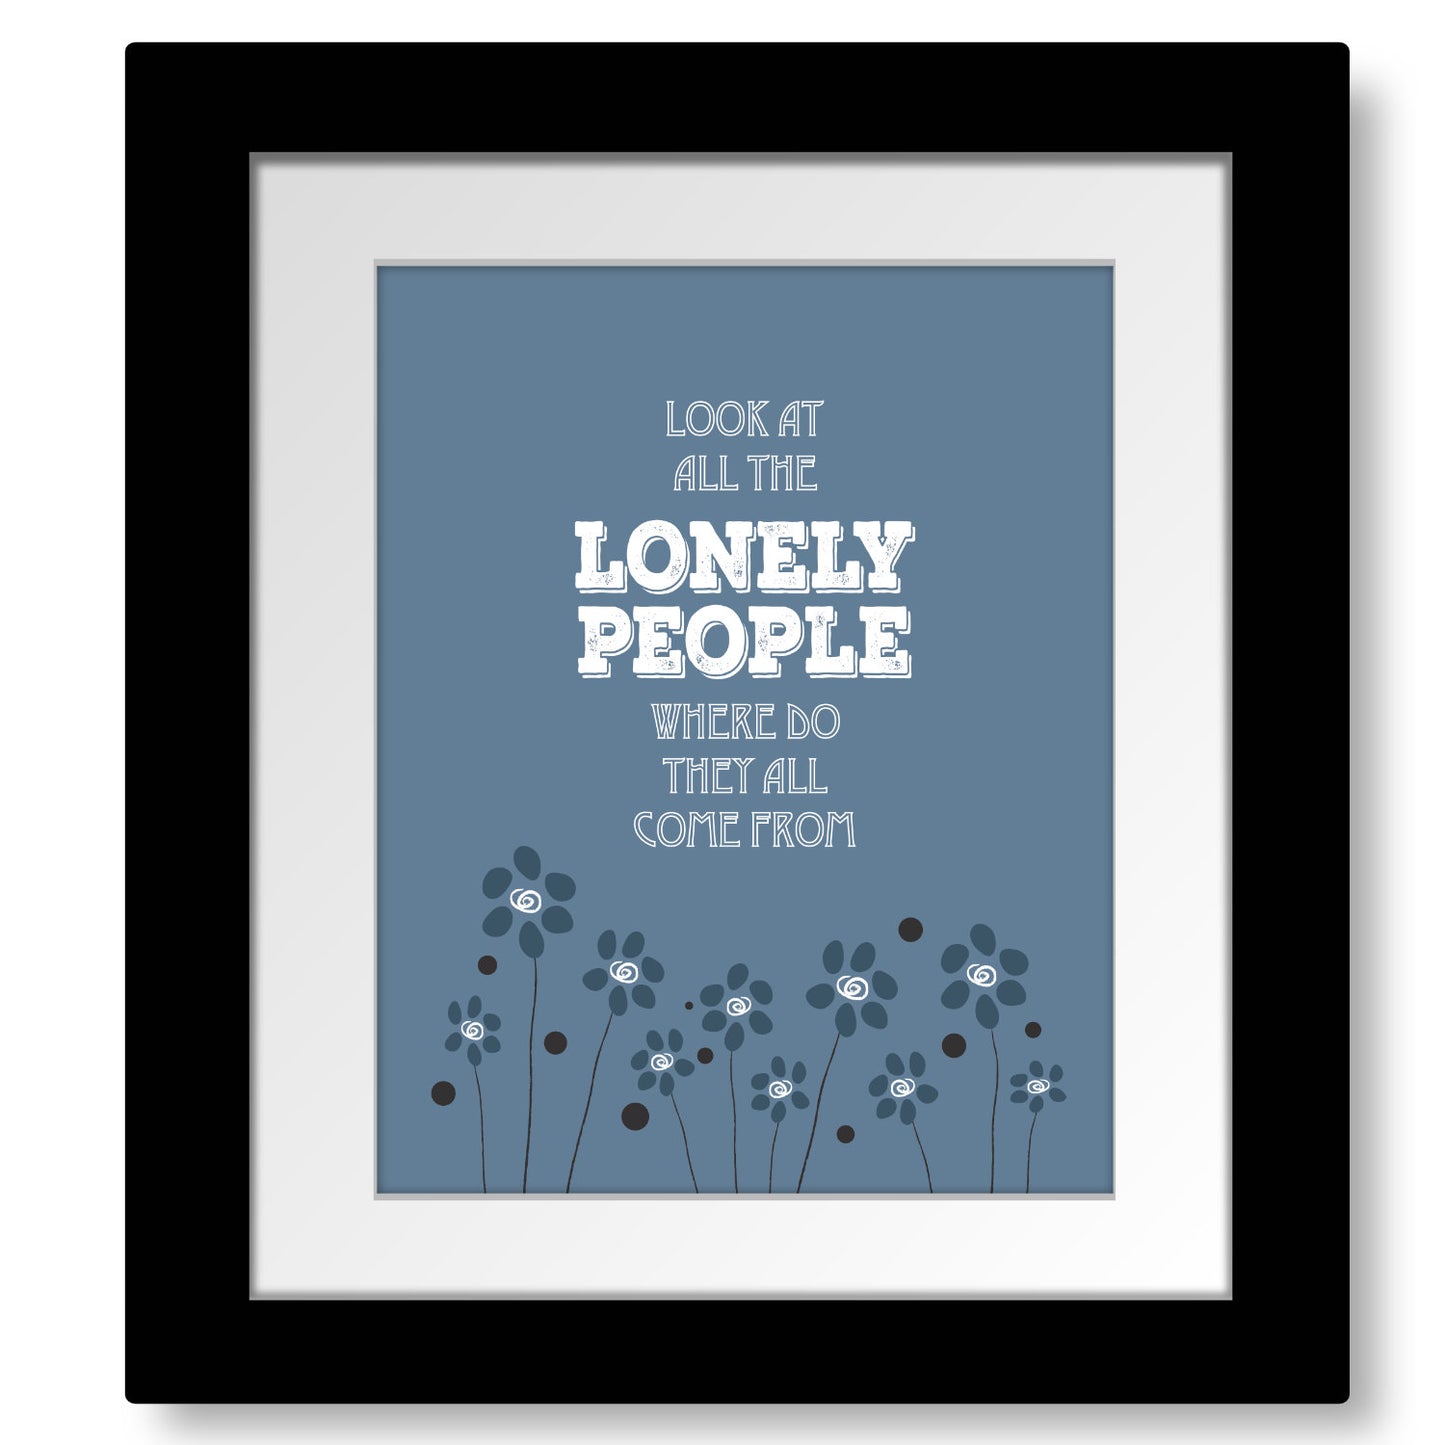 Eleanor Rigby by Beatles - Classic Rock Music Wall Art Print